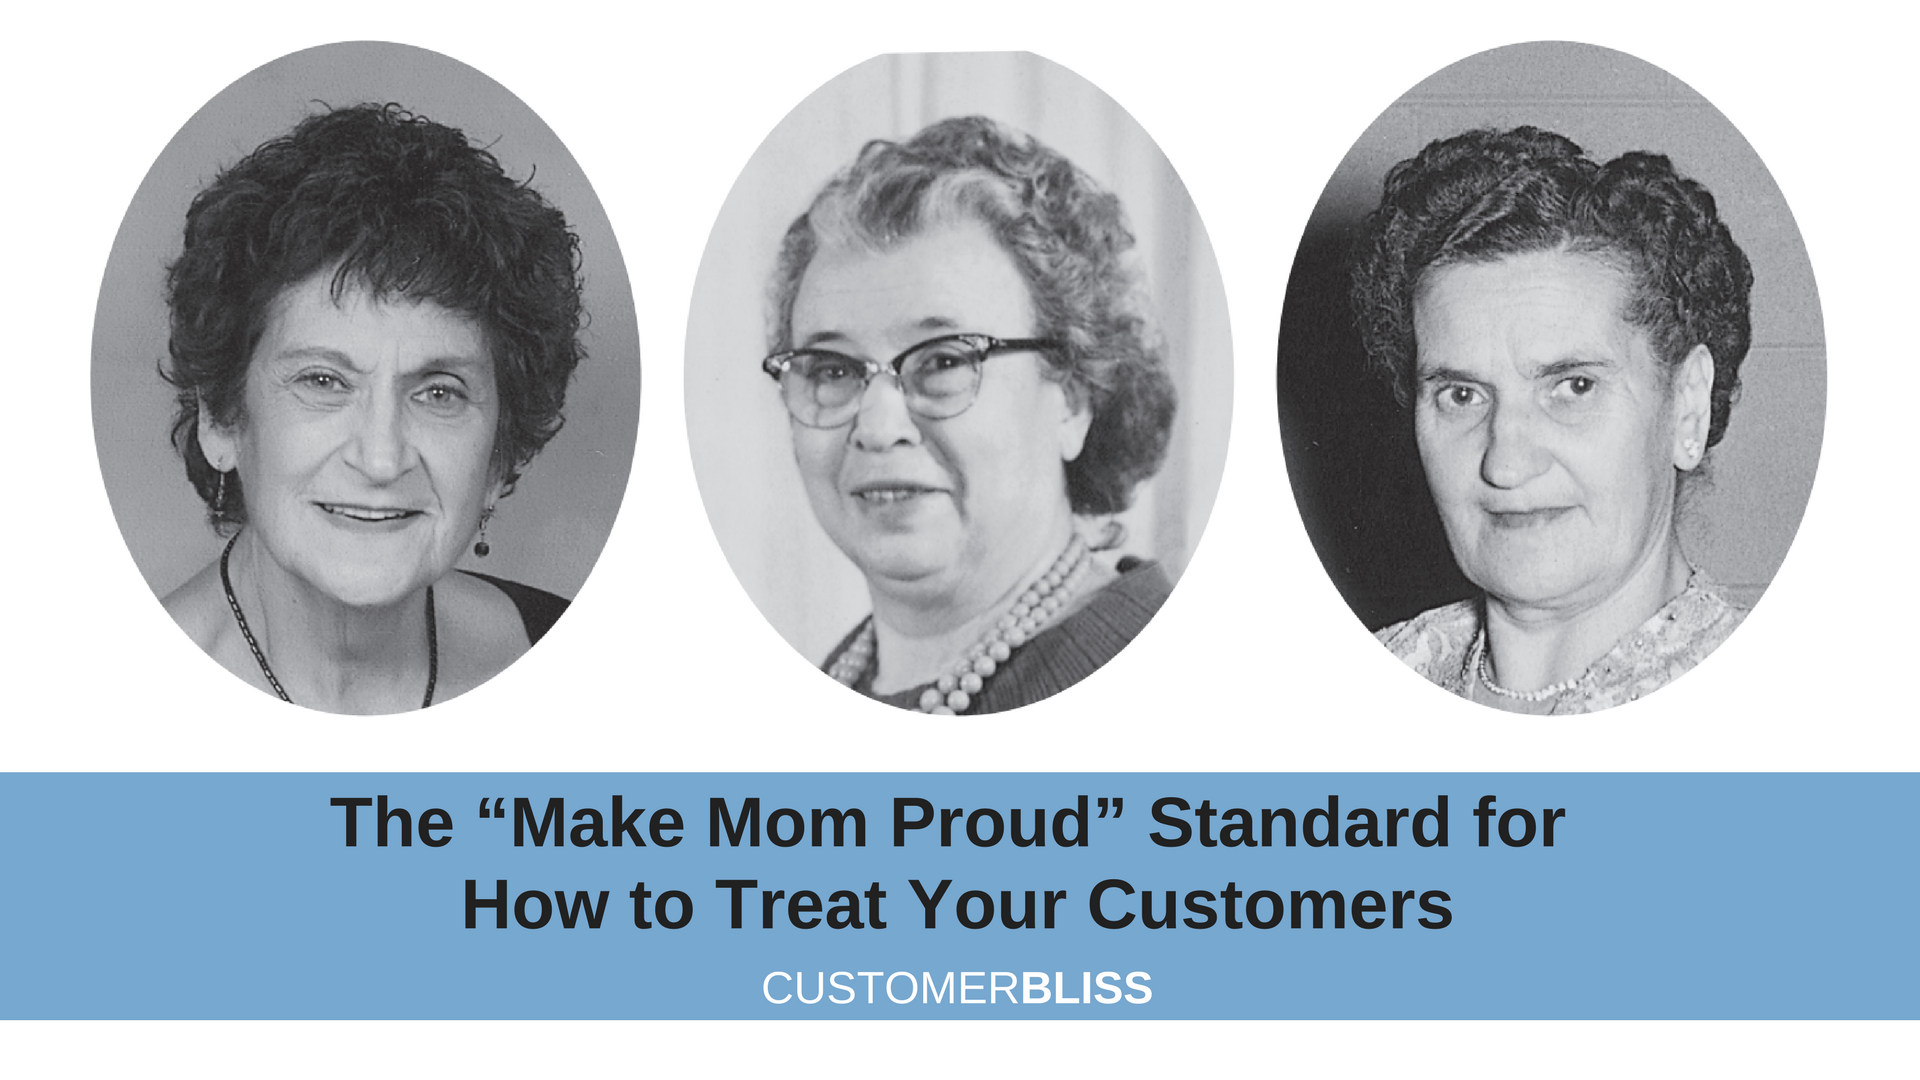 The “Make Mom Proud” Standard for How to Treat Your Customers